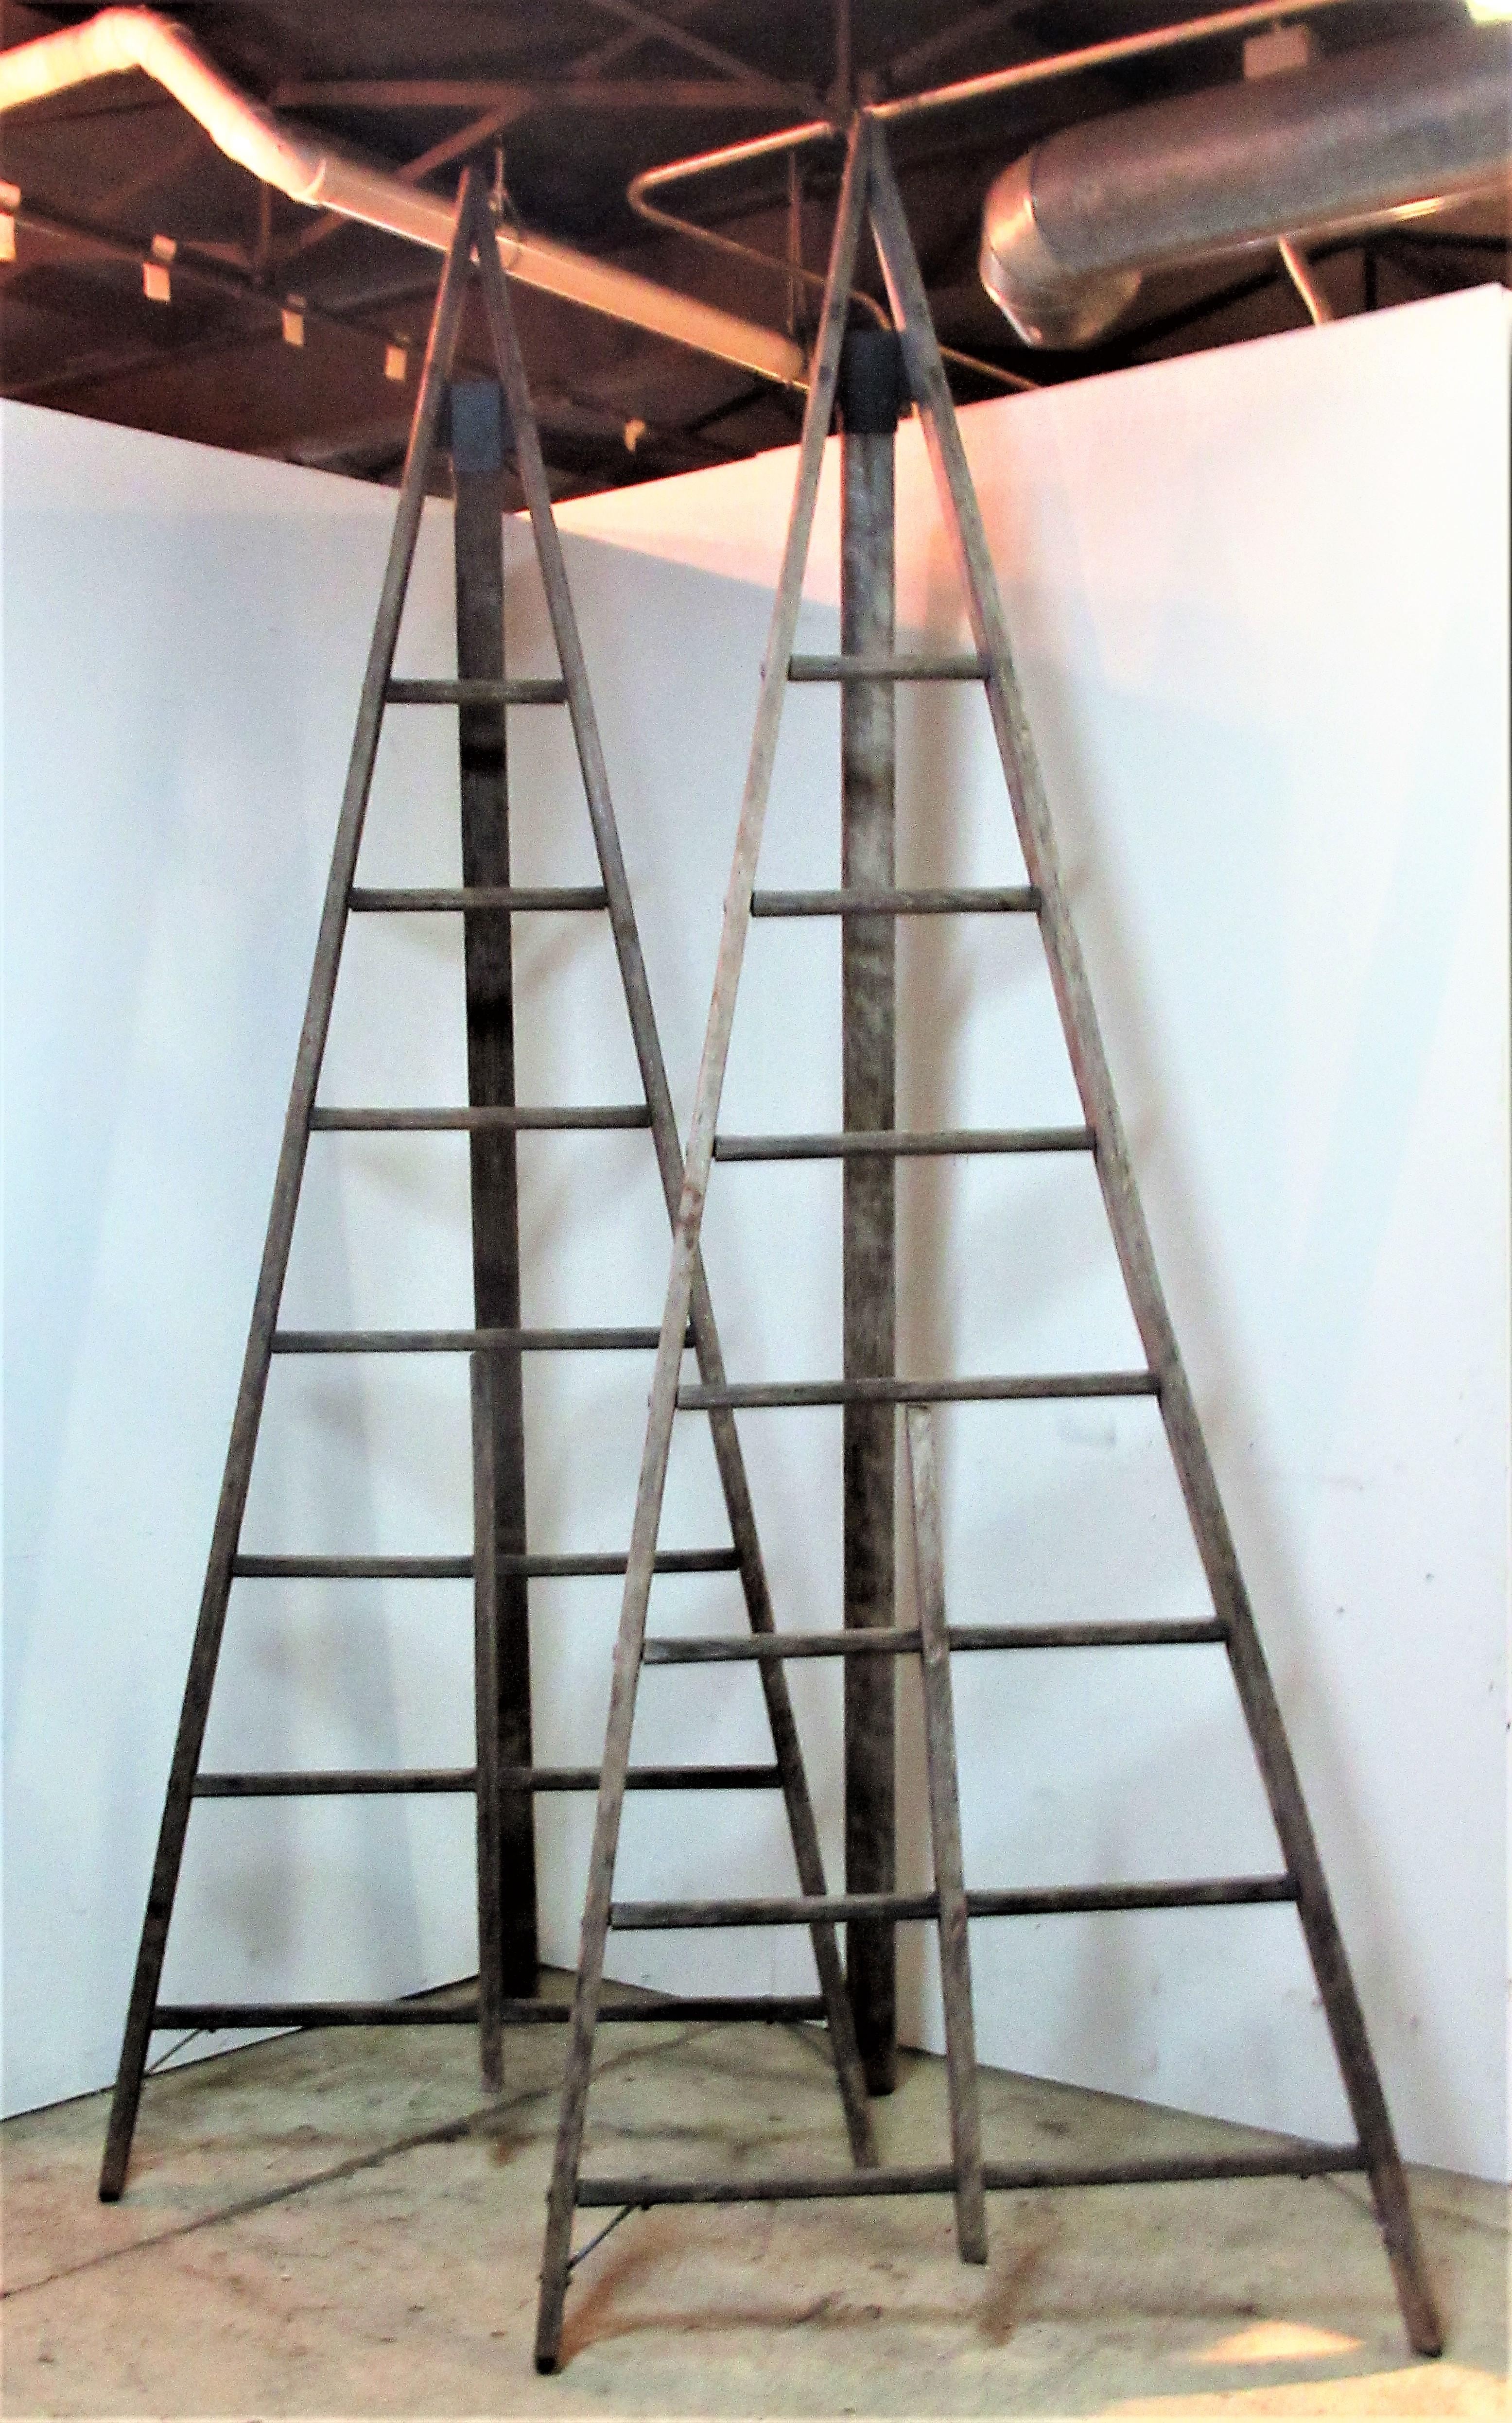 A-frame form folding peak top wood and riveted steel industrial orchard harvest work ladders with beautifully aged old weathered driftwood gray surface and great architectonic sculptural form. American, circa 1940-1950. Ladders measure folded 110